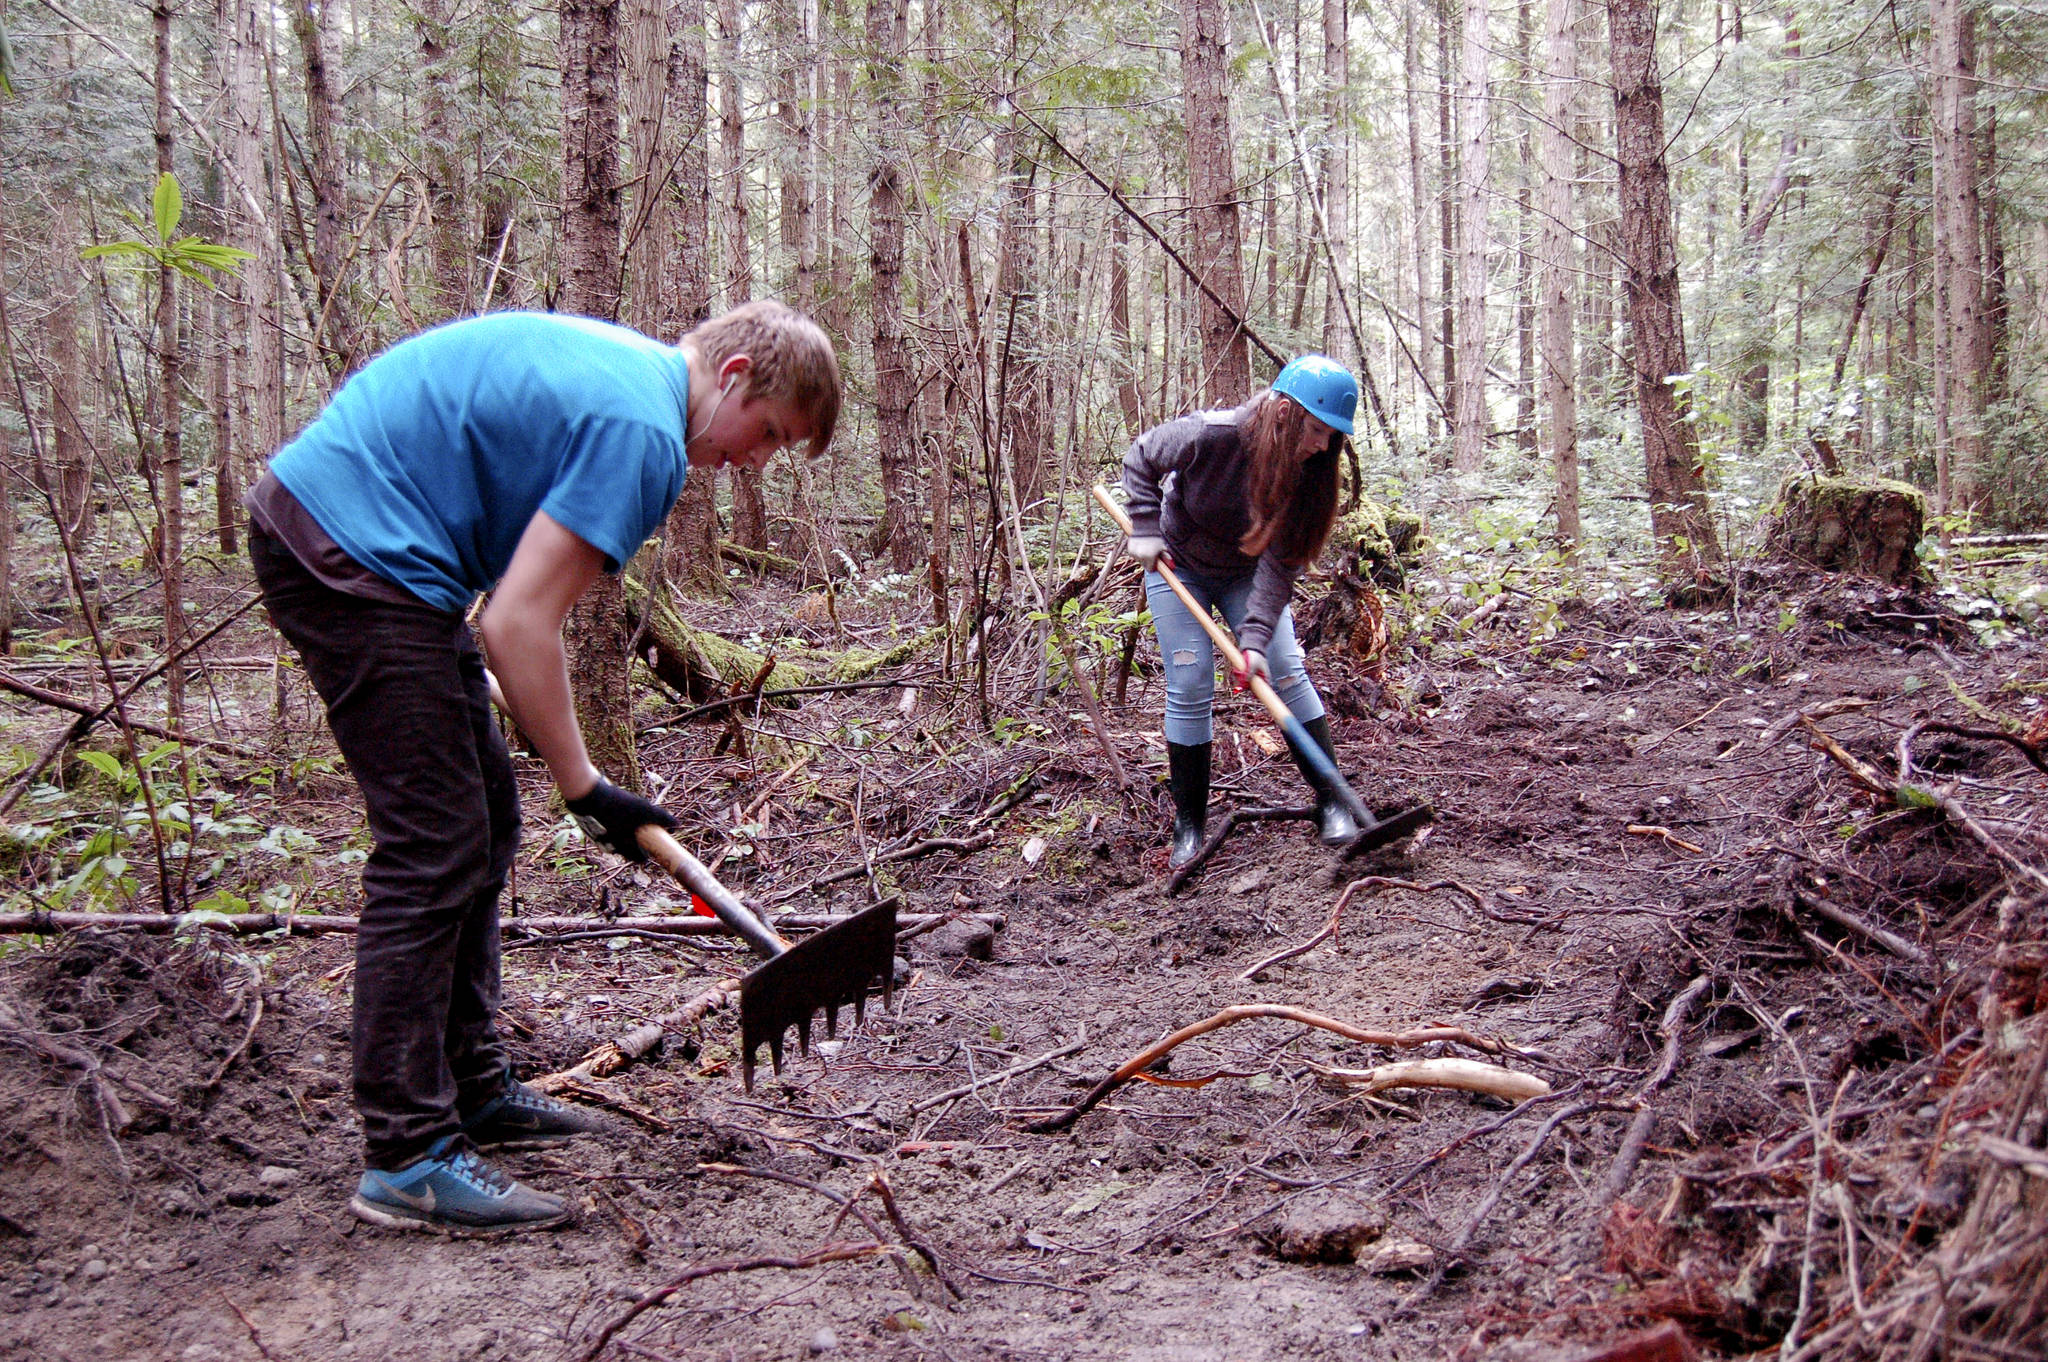 Sequim High School students Sequoia Swindler, left, and Sara Minty clear a trail last Wednesday on the Miller Peninsula as part of a project led by Powell Jones, executive director of the Dungeness River Audubon Center, to bring local youths into the wilderness. The trail was funded by a grant through the U.S. Forest Service. (Matthew Nash/Olympic Peninsula News Group)